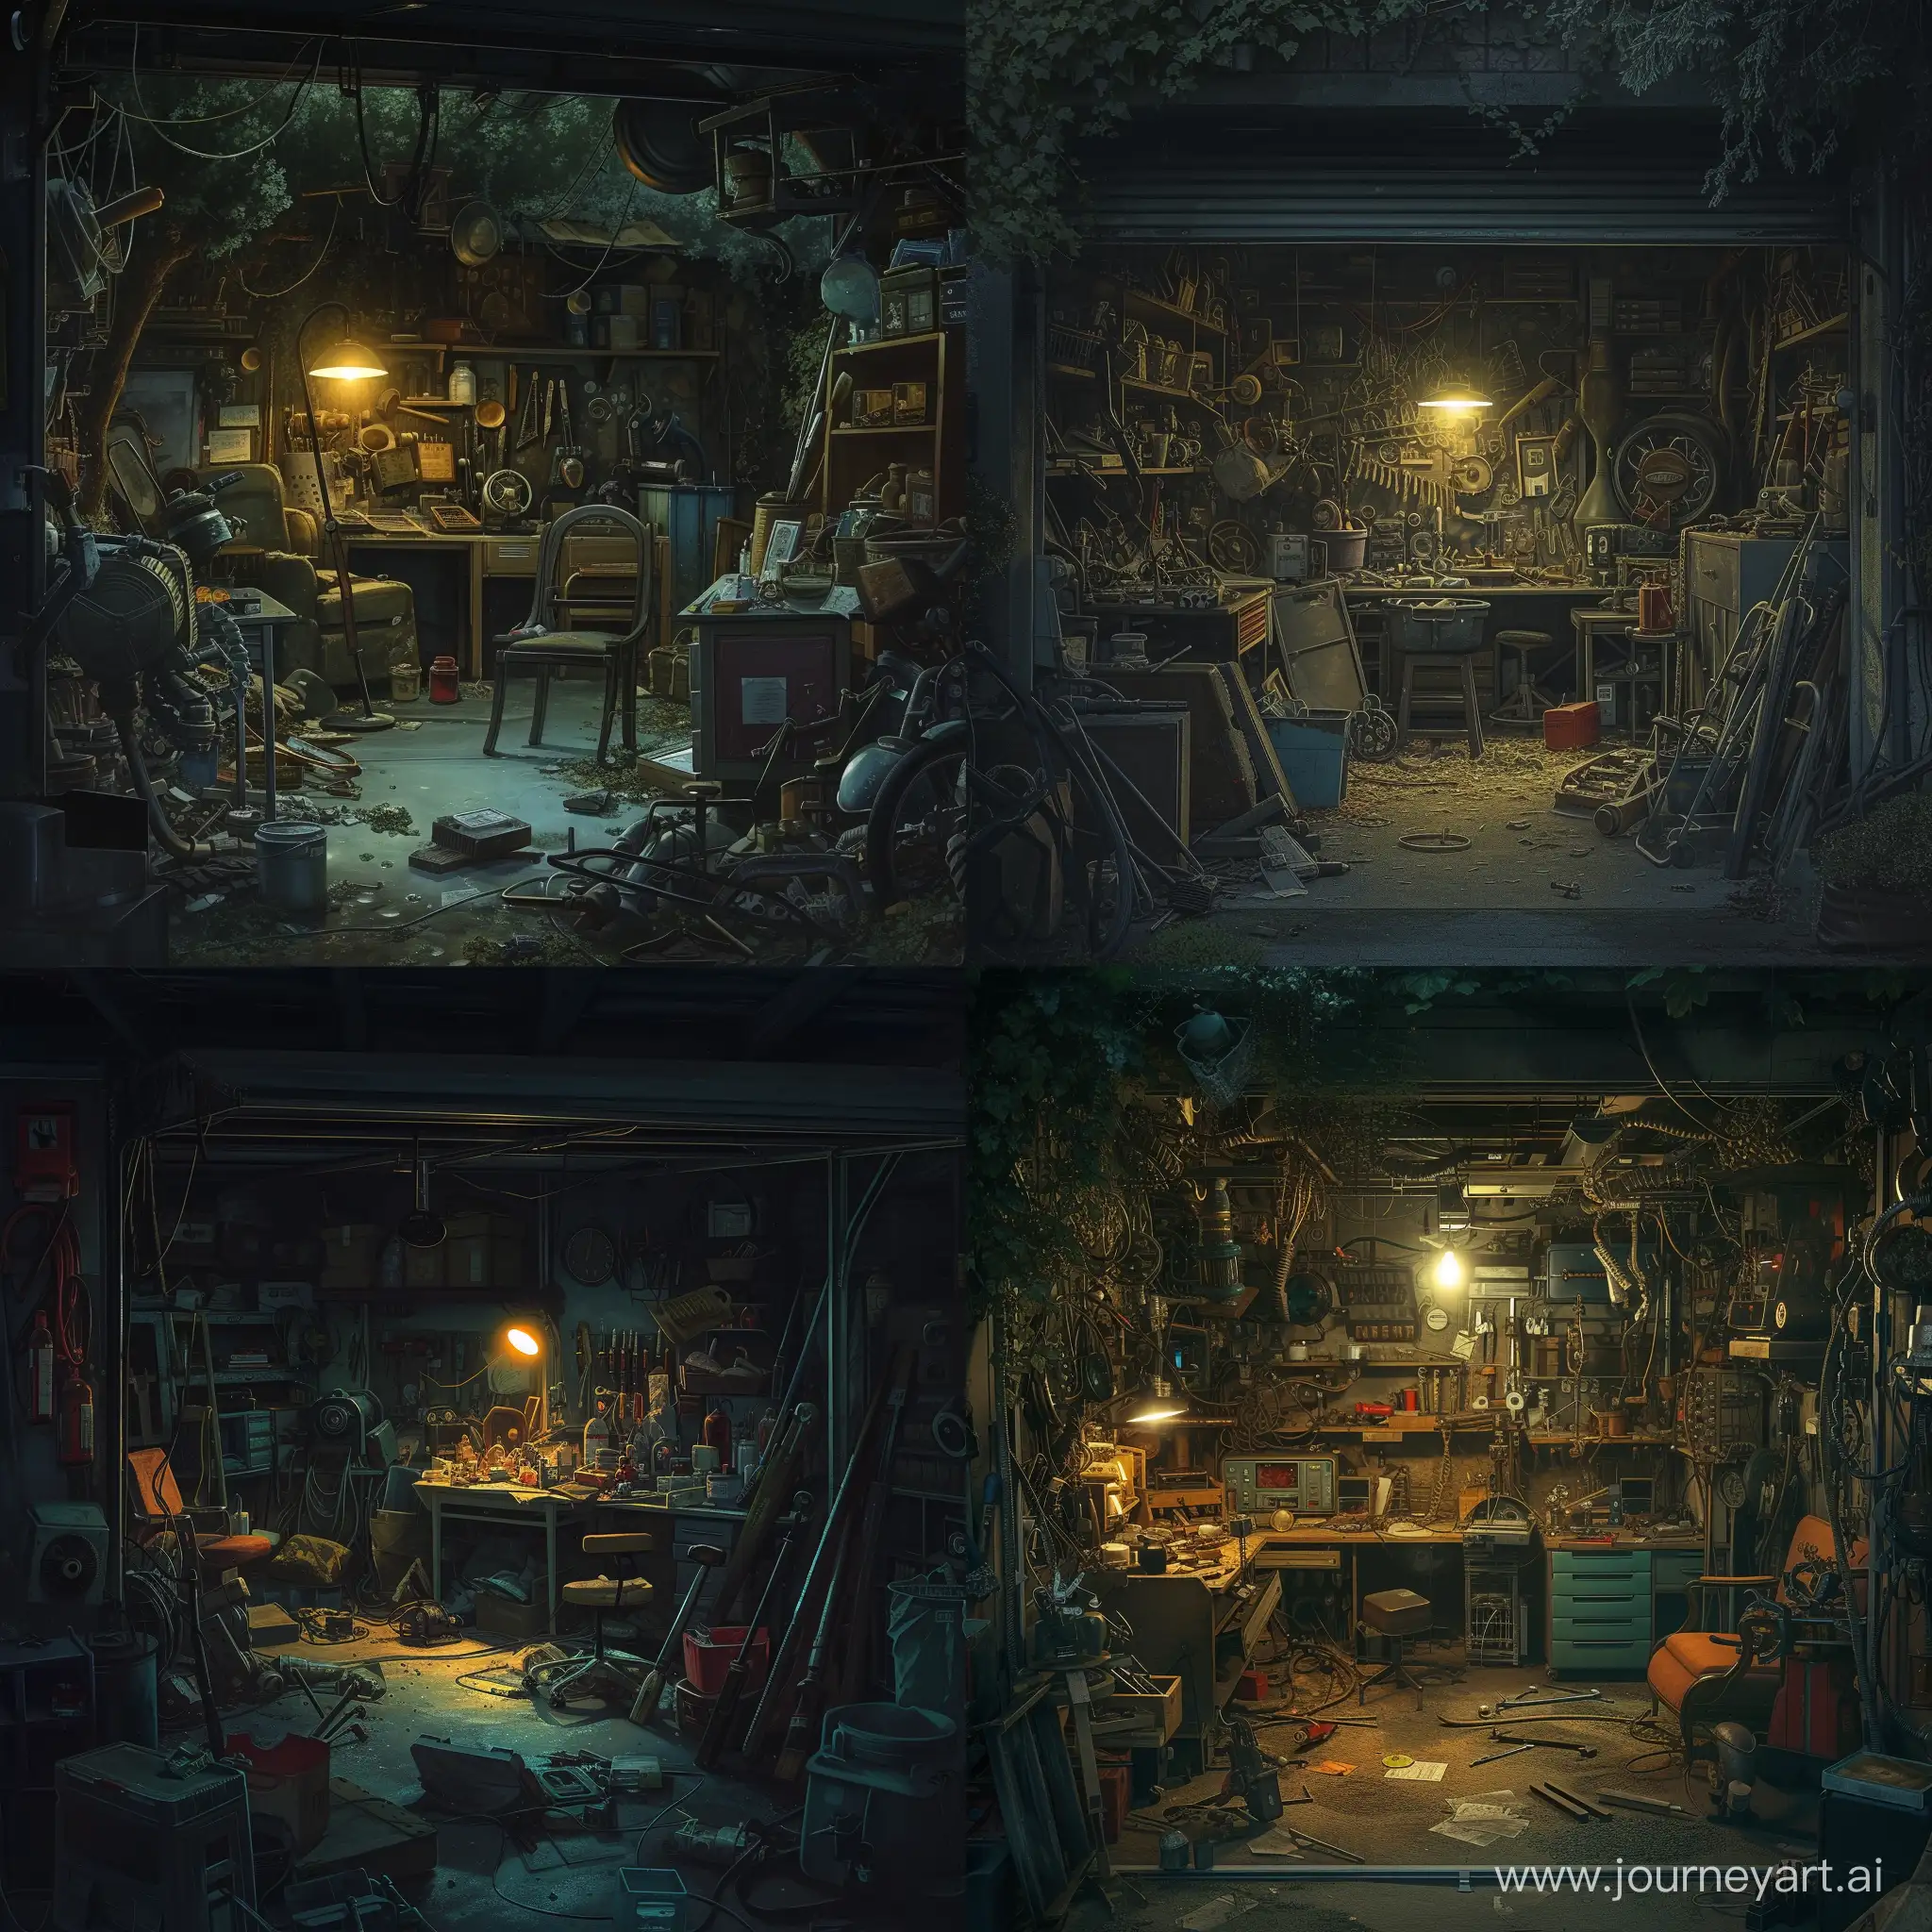  A cluttered garage filled with forgotten treasures and dusty furniture, illuminated by a single flickering light. The scene is reminiscent of a forgotten laboratory, with tools and equipment scattered about in a chaotic yet intriguing manner.